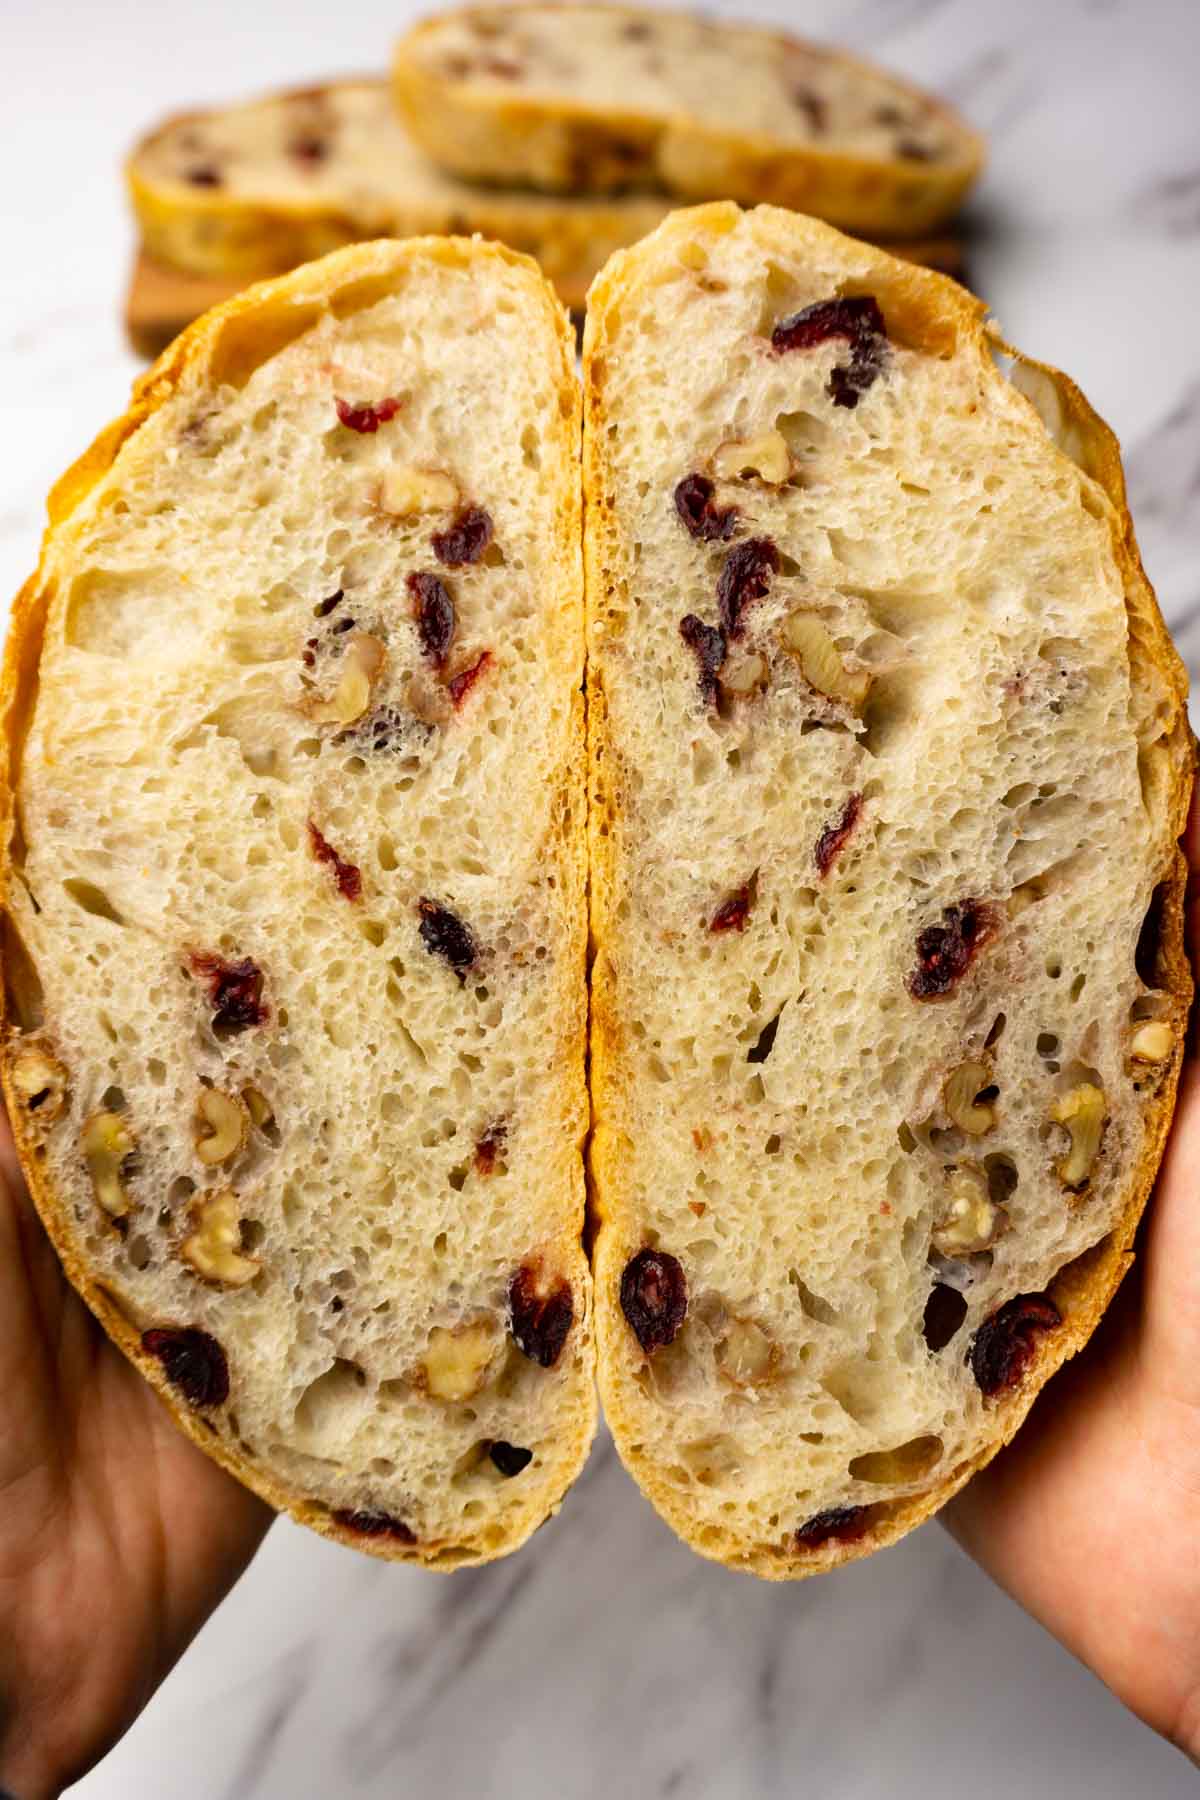 A cut in half loaf of bread with walnuts and dried cranberries.